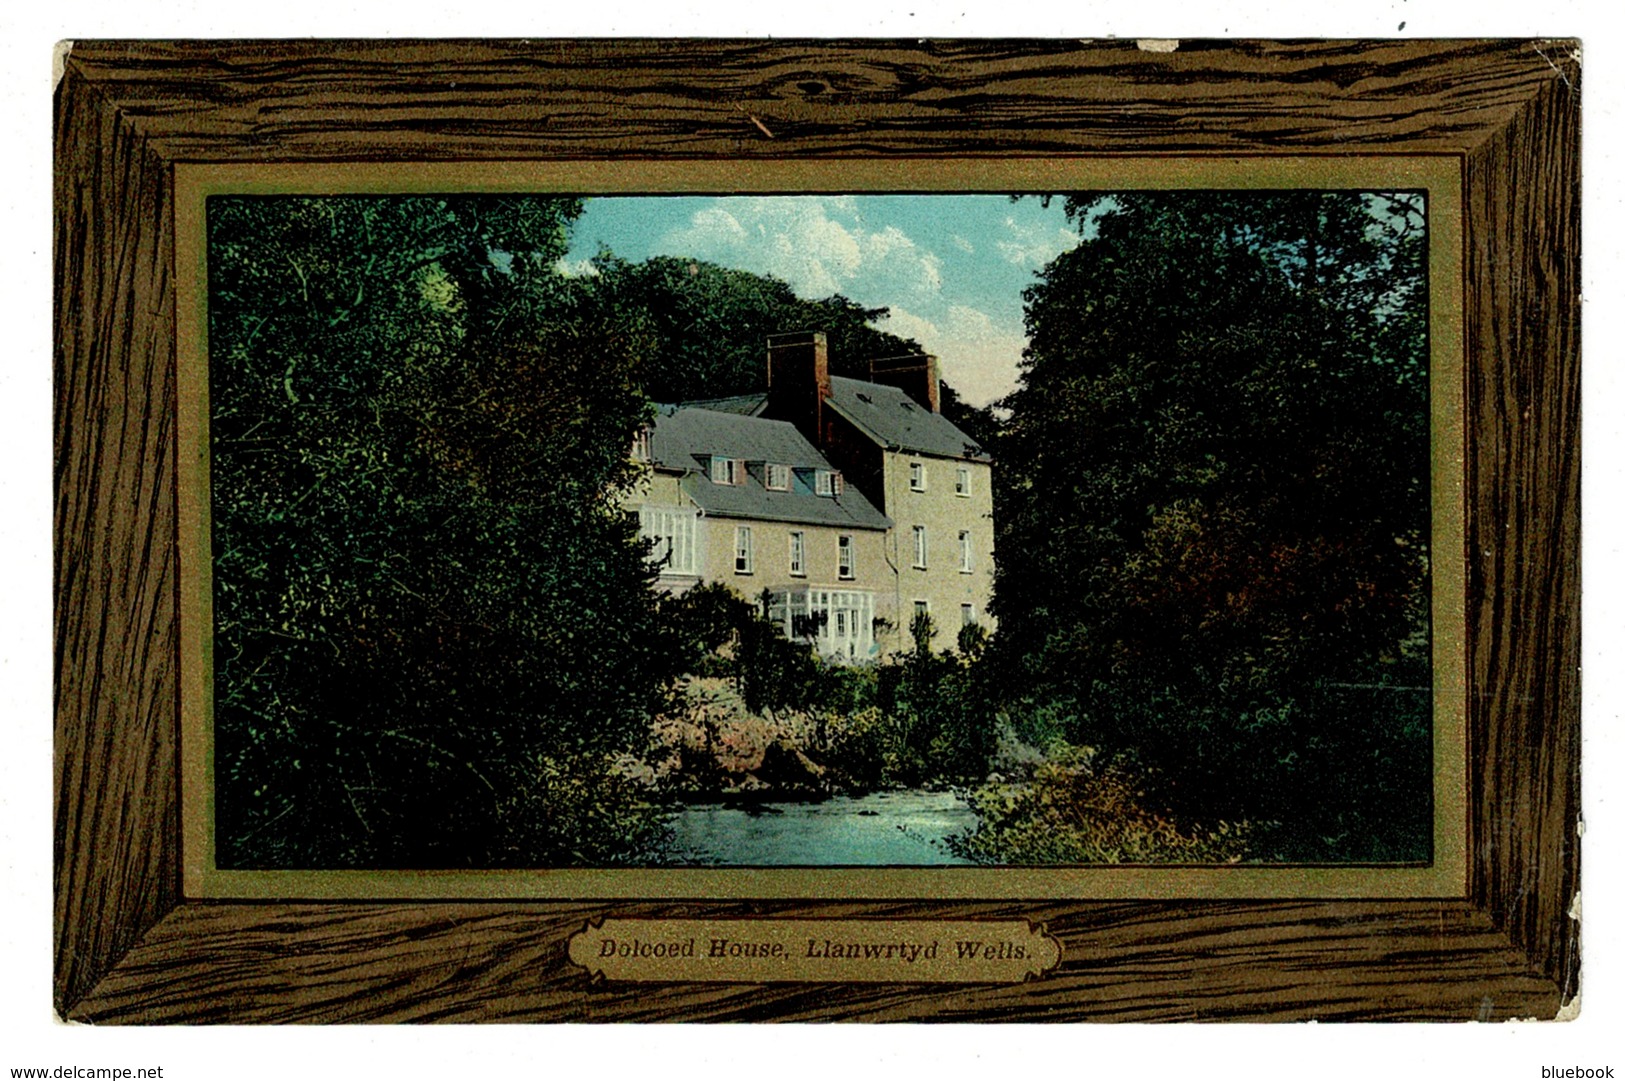 Ref 1324 - Early Postcard - Dolcoed House Llanwrtyd Wells - Breconshire Wales - Breconshire